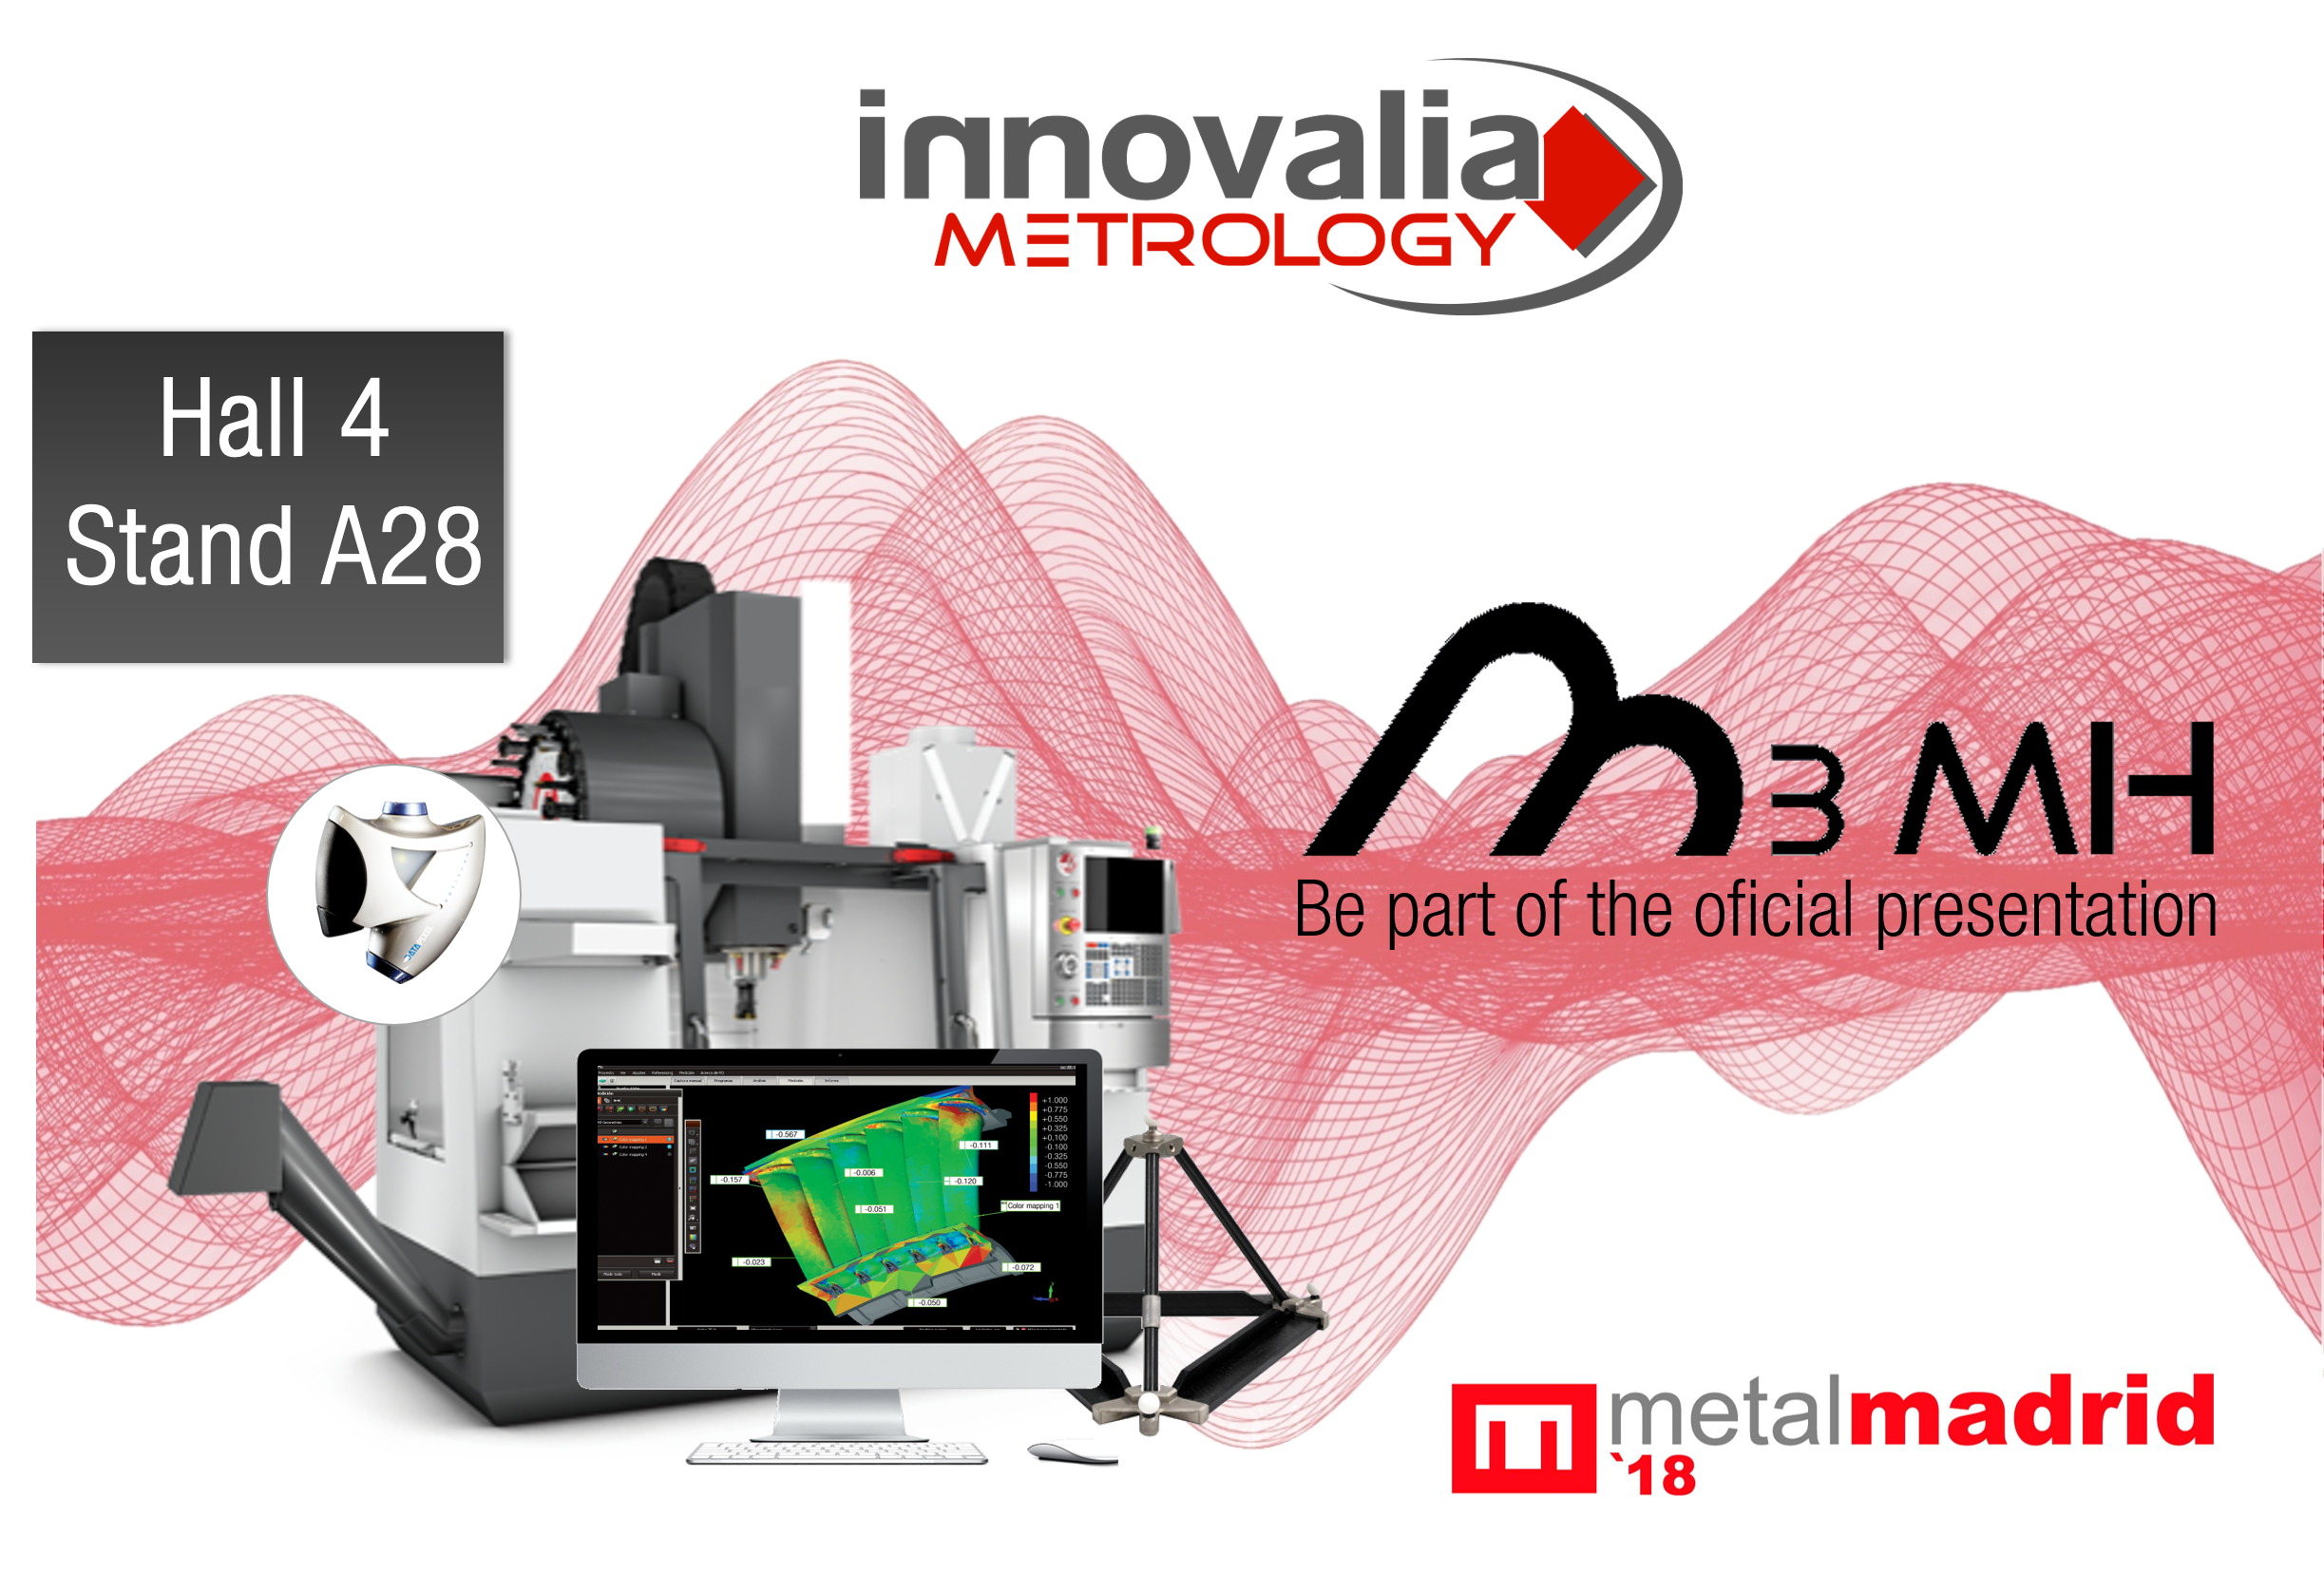 Innovalia Metrology shows the M3 experience with its metrological solutions at Metalmadrid.